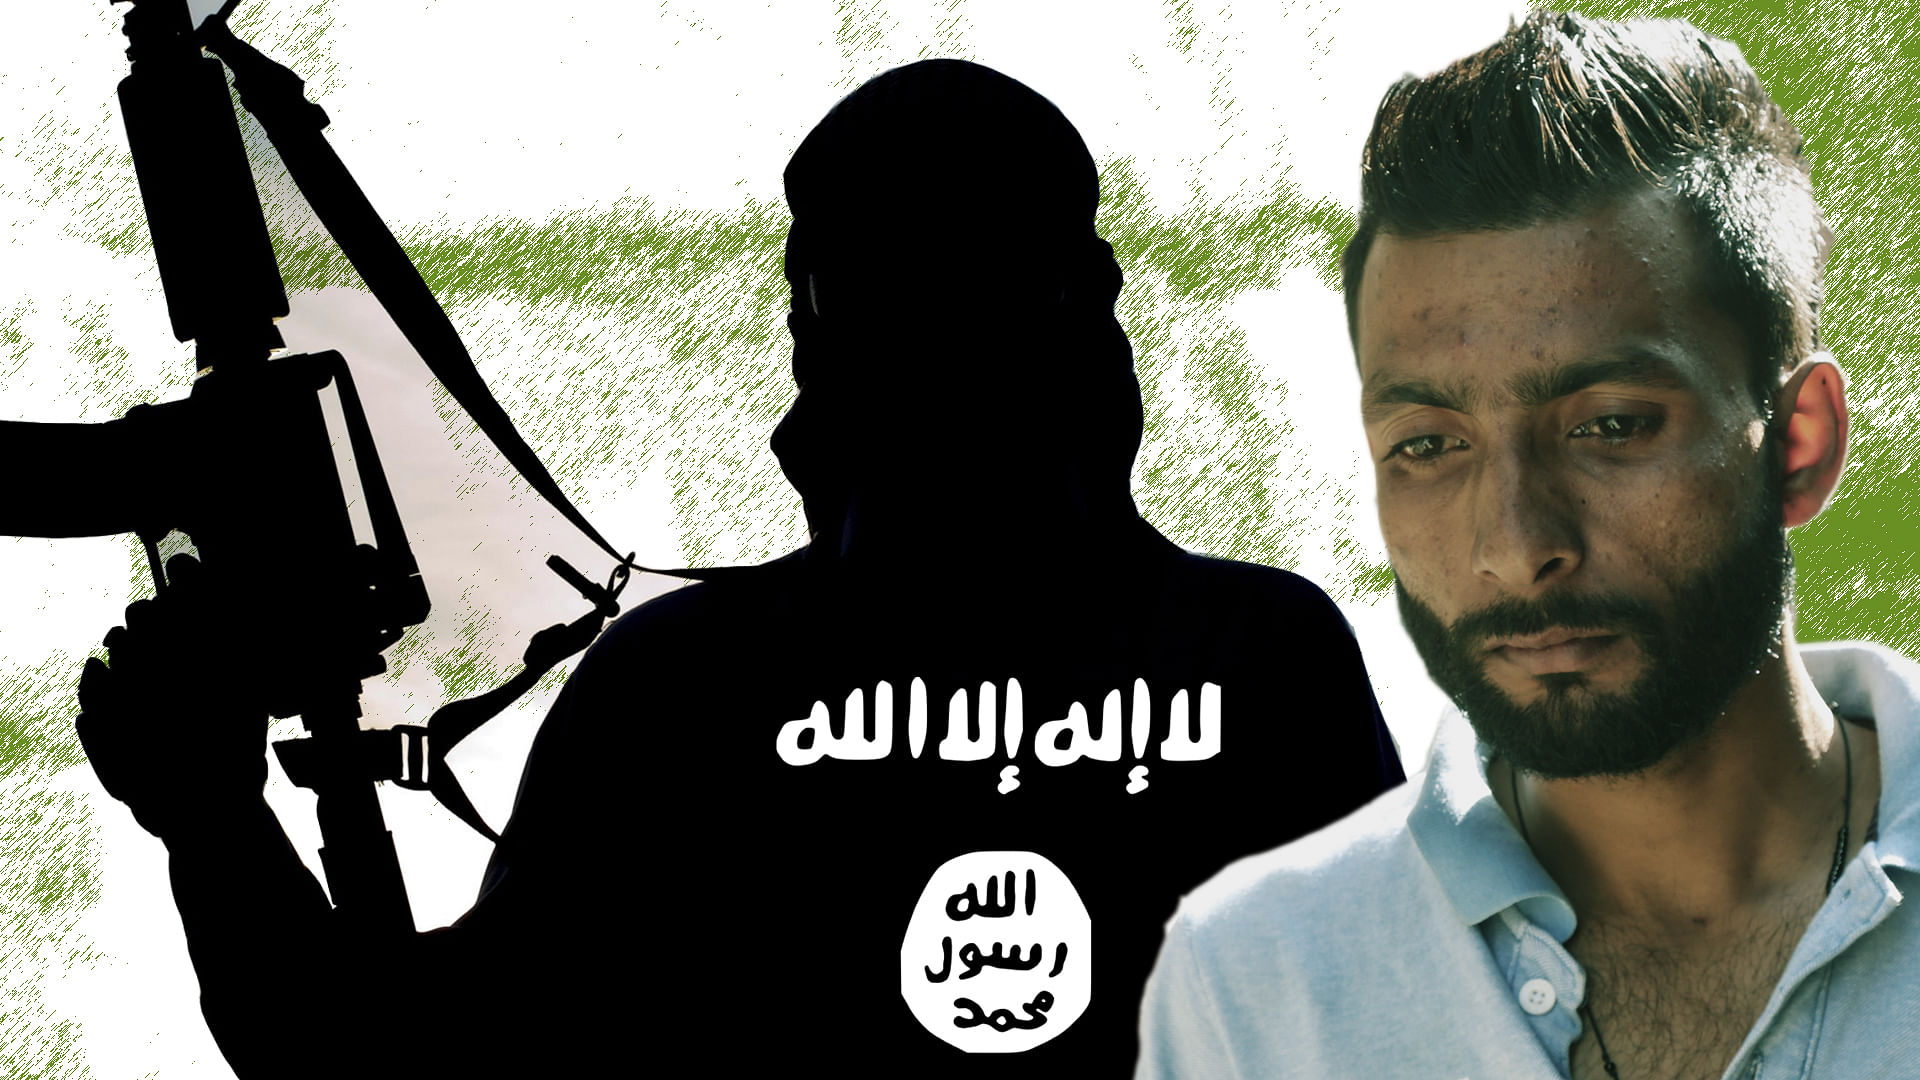 40 Indians were abducted by ISIS from Mosul, Iraq in June 2014. Only one returned to India – Harjit Masih.&nbsp;